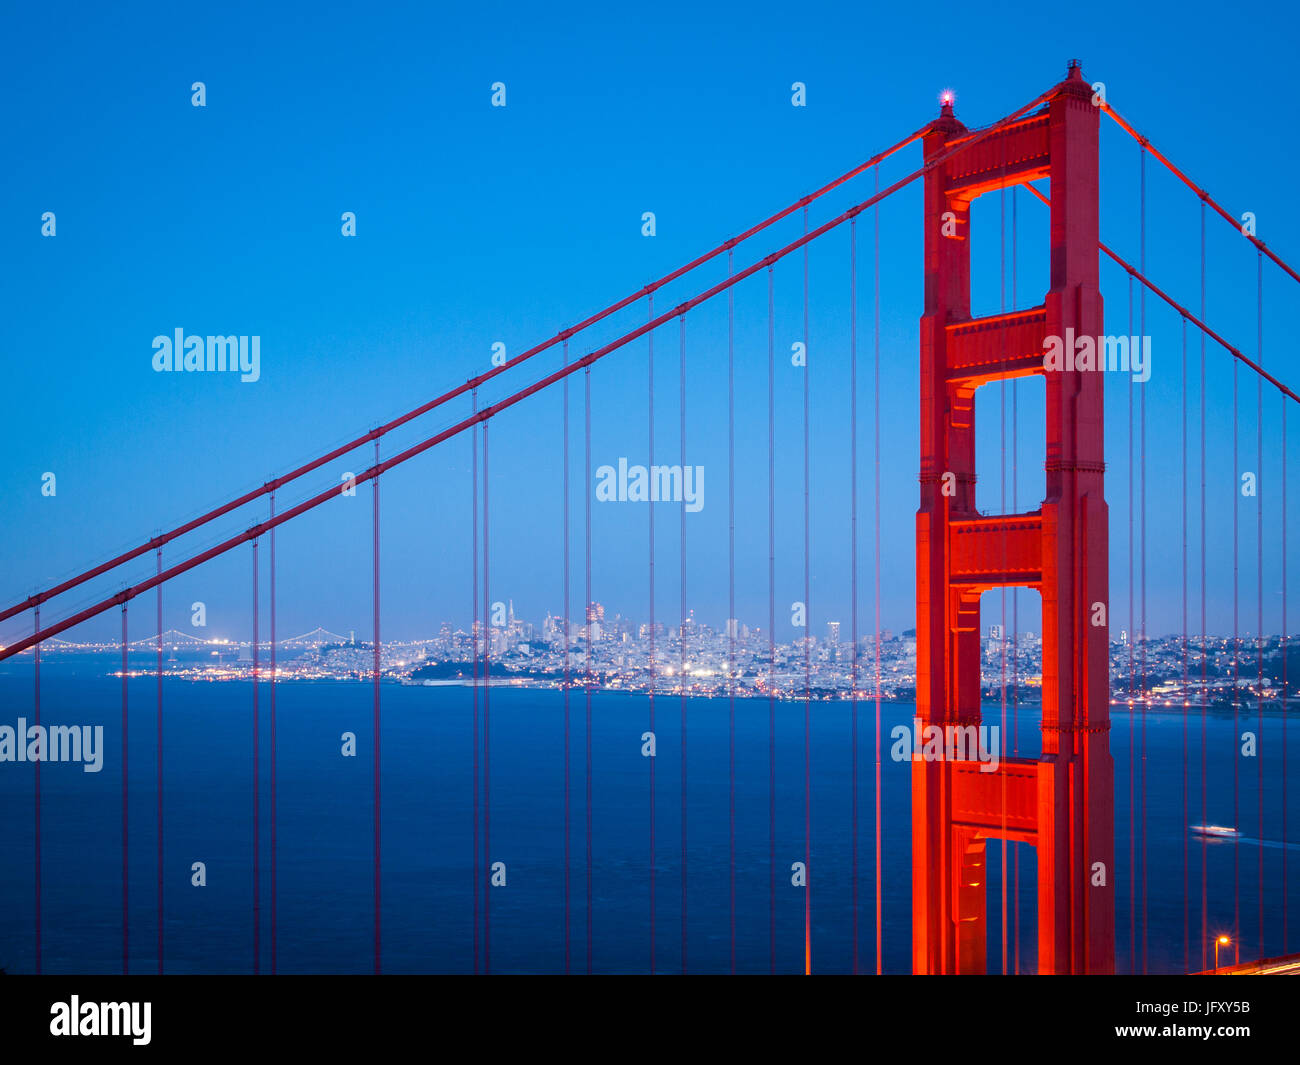 A spectacular view of the Golden Gate Bridge at night, with the illuminated skyline of San Francisco in the background Stock Photo